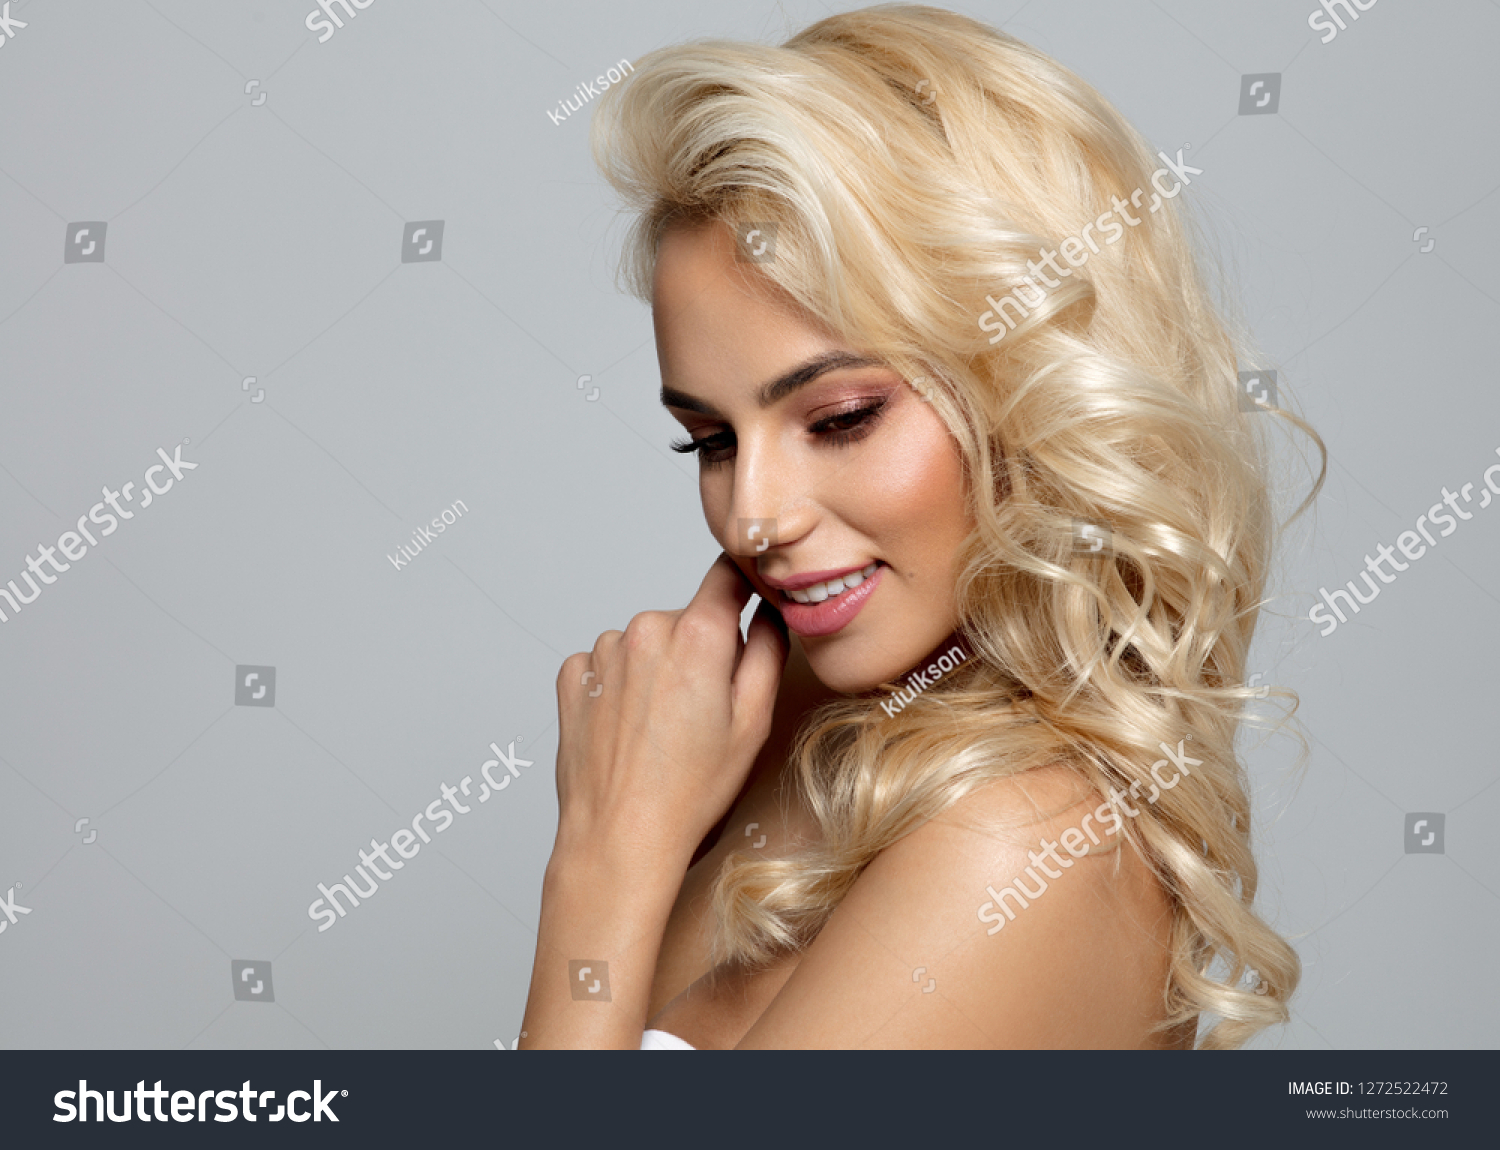 Photo of blond female model looking down #1272522472